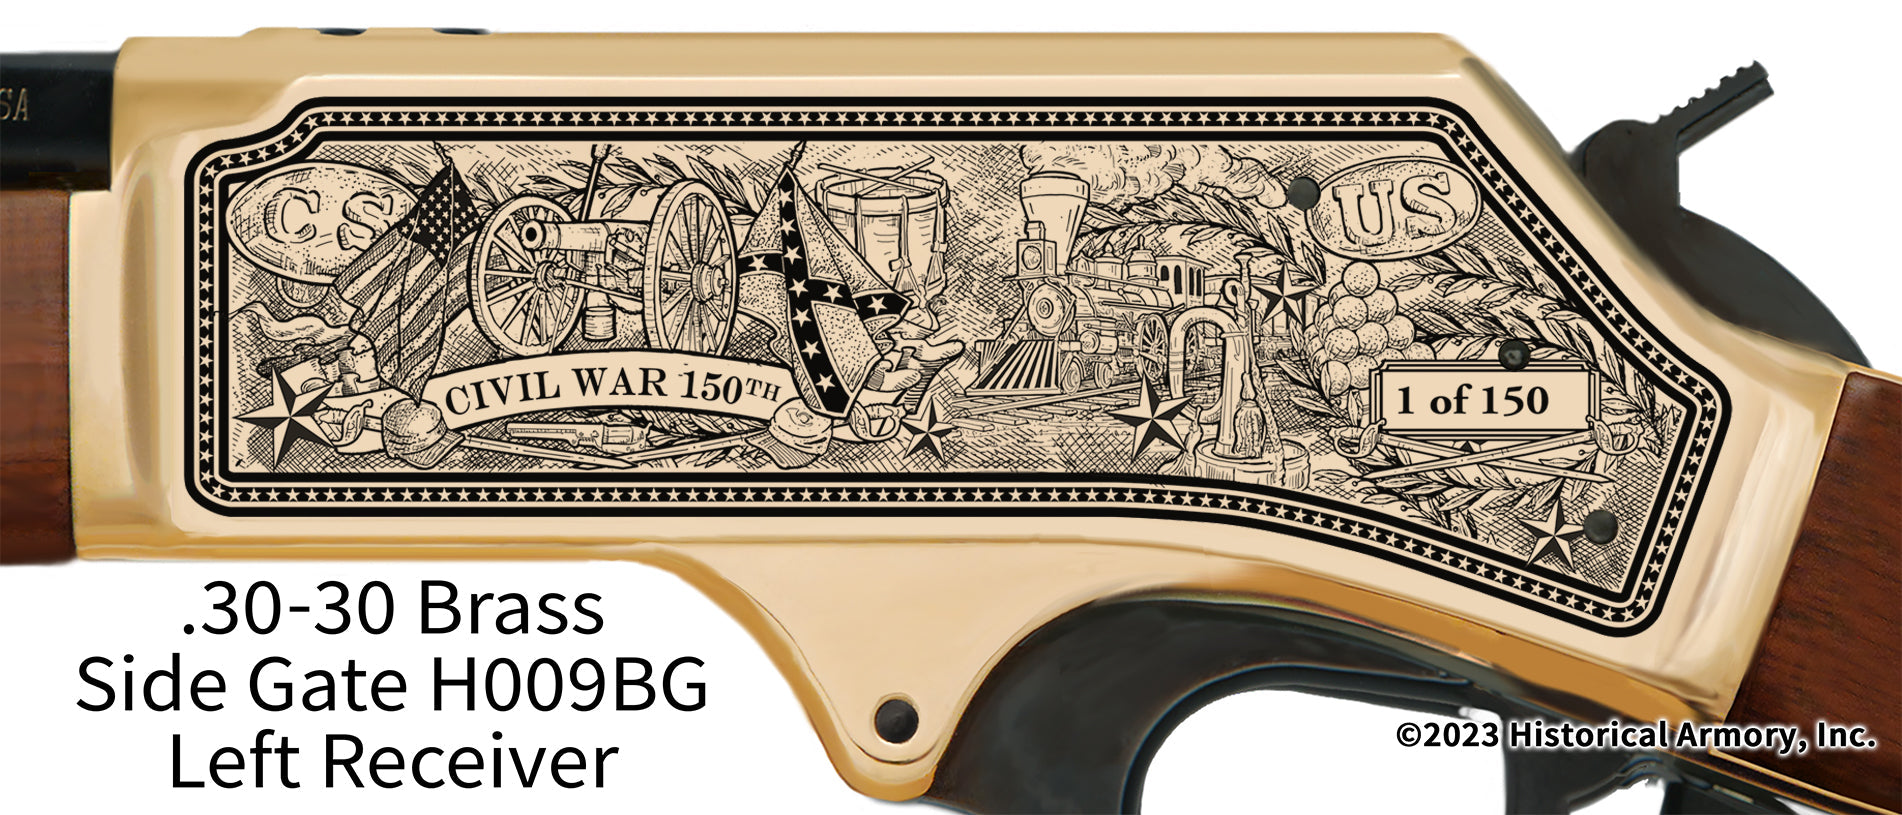 Civil War 150th Anniversary 1863 Limited Edition Henry .30-30